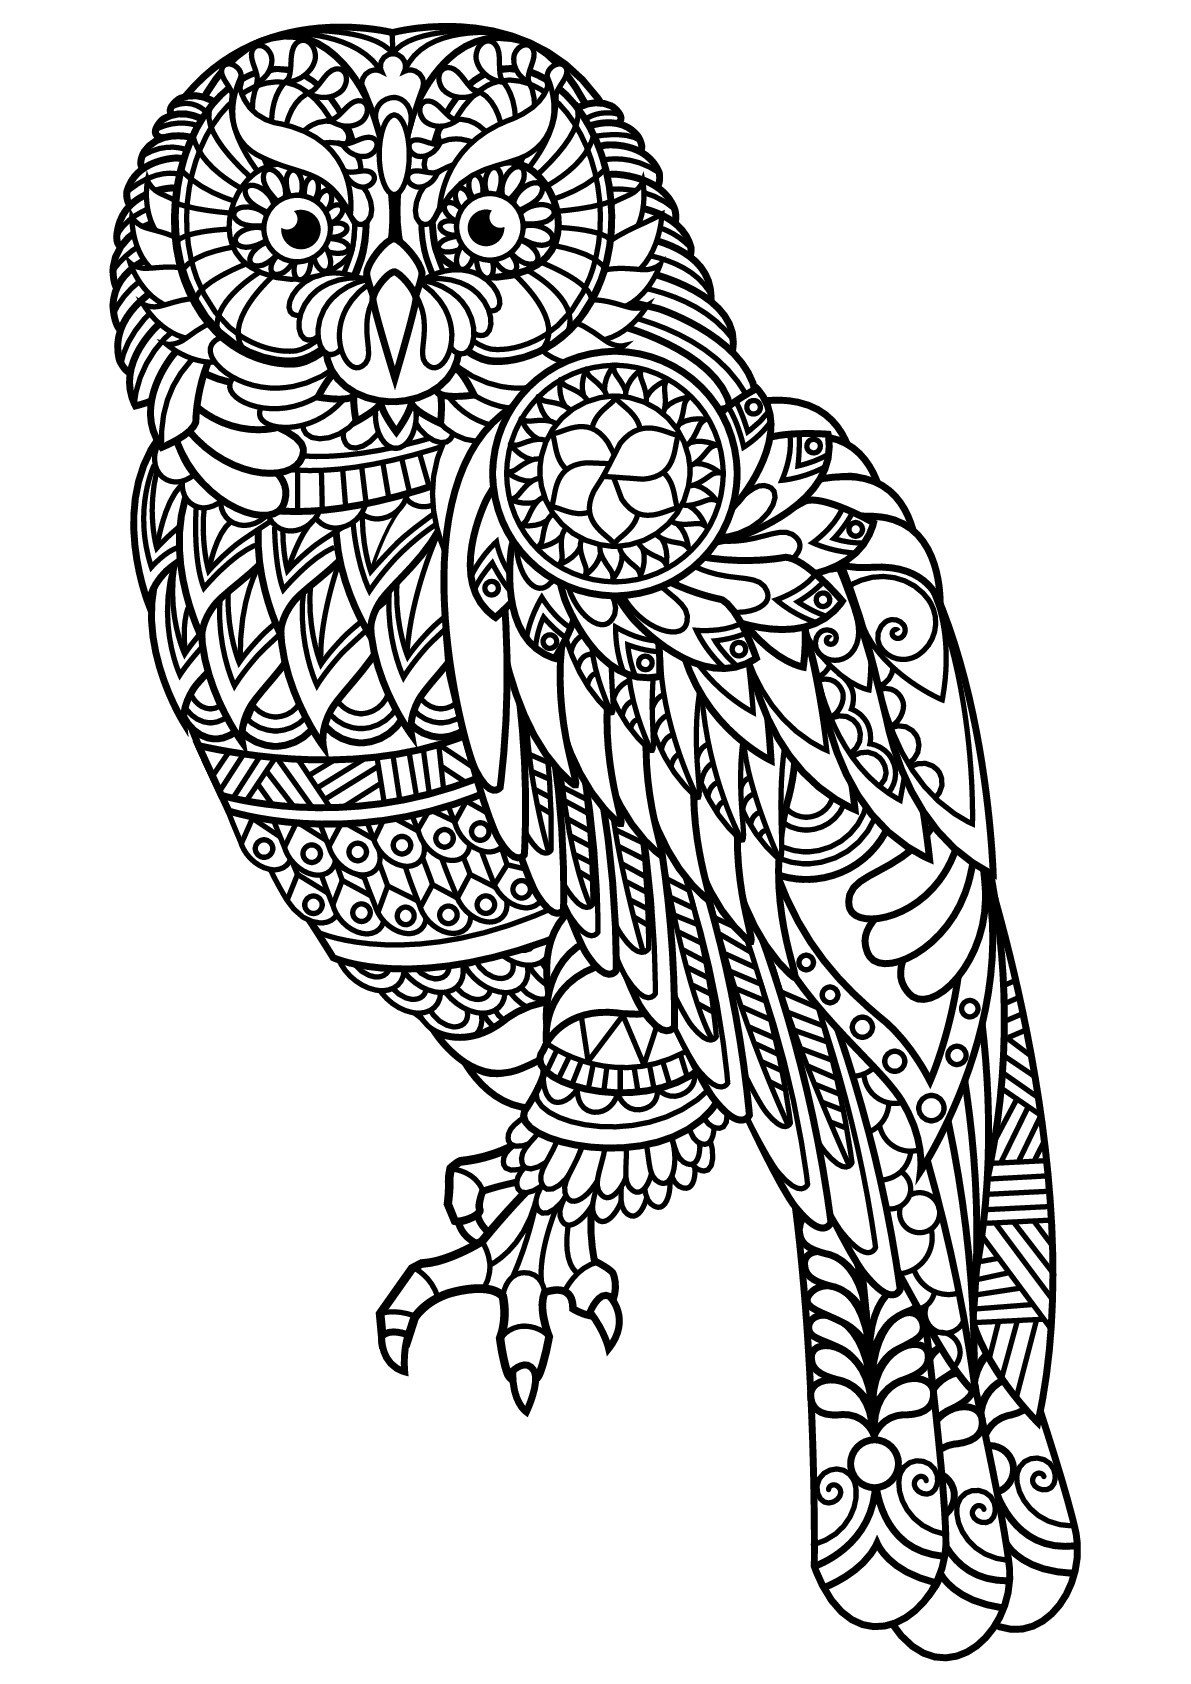 Printable Owl Coloring Pages For Adults
 Free book owl Owls Adult Coloring Pages